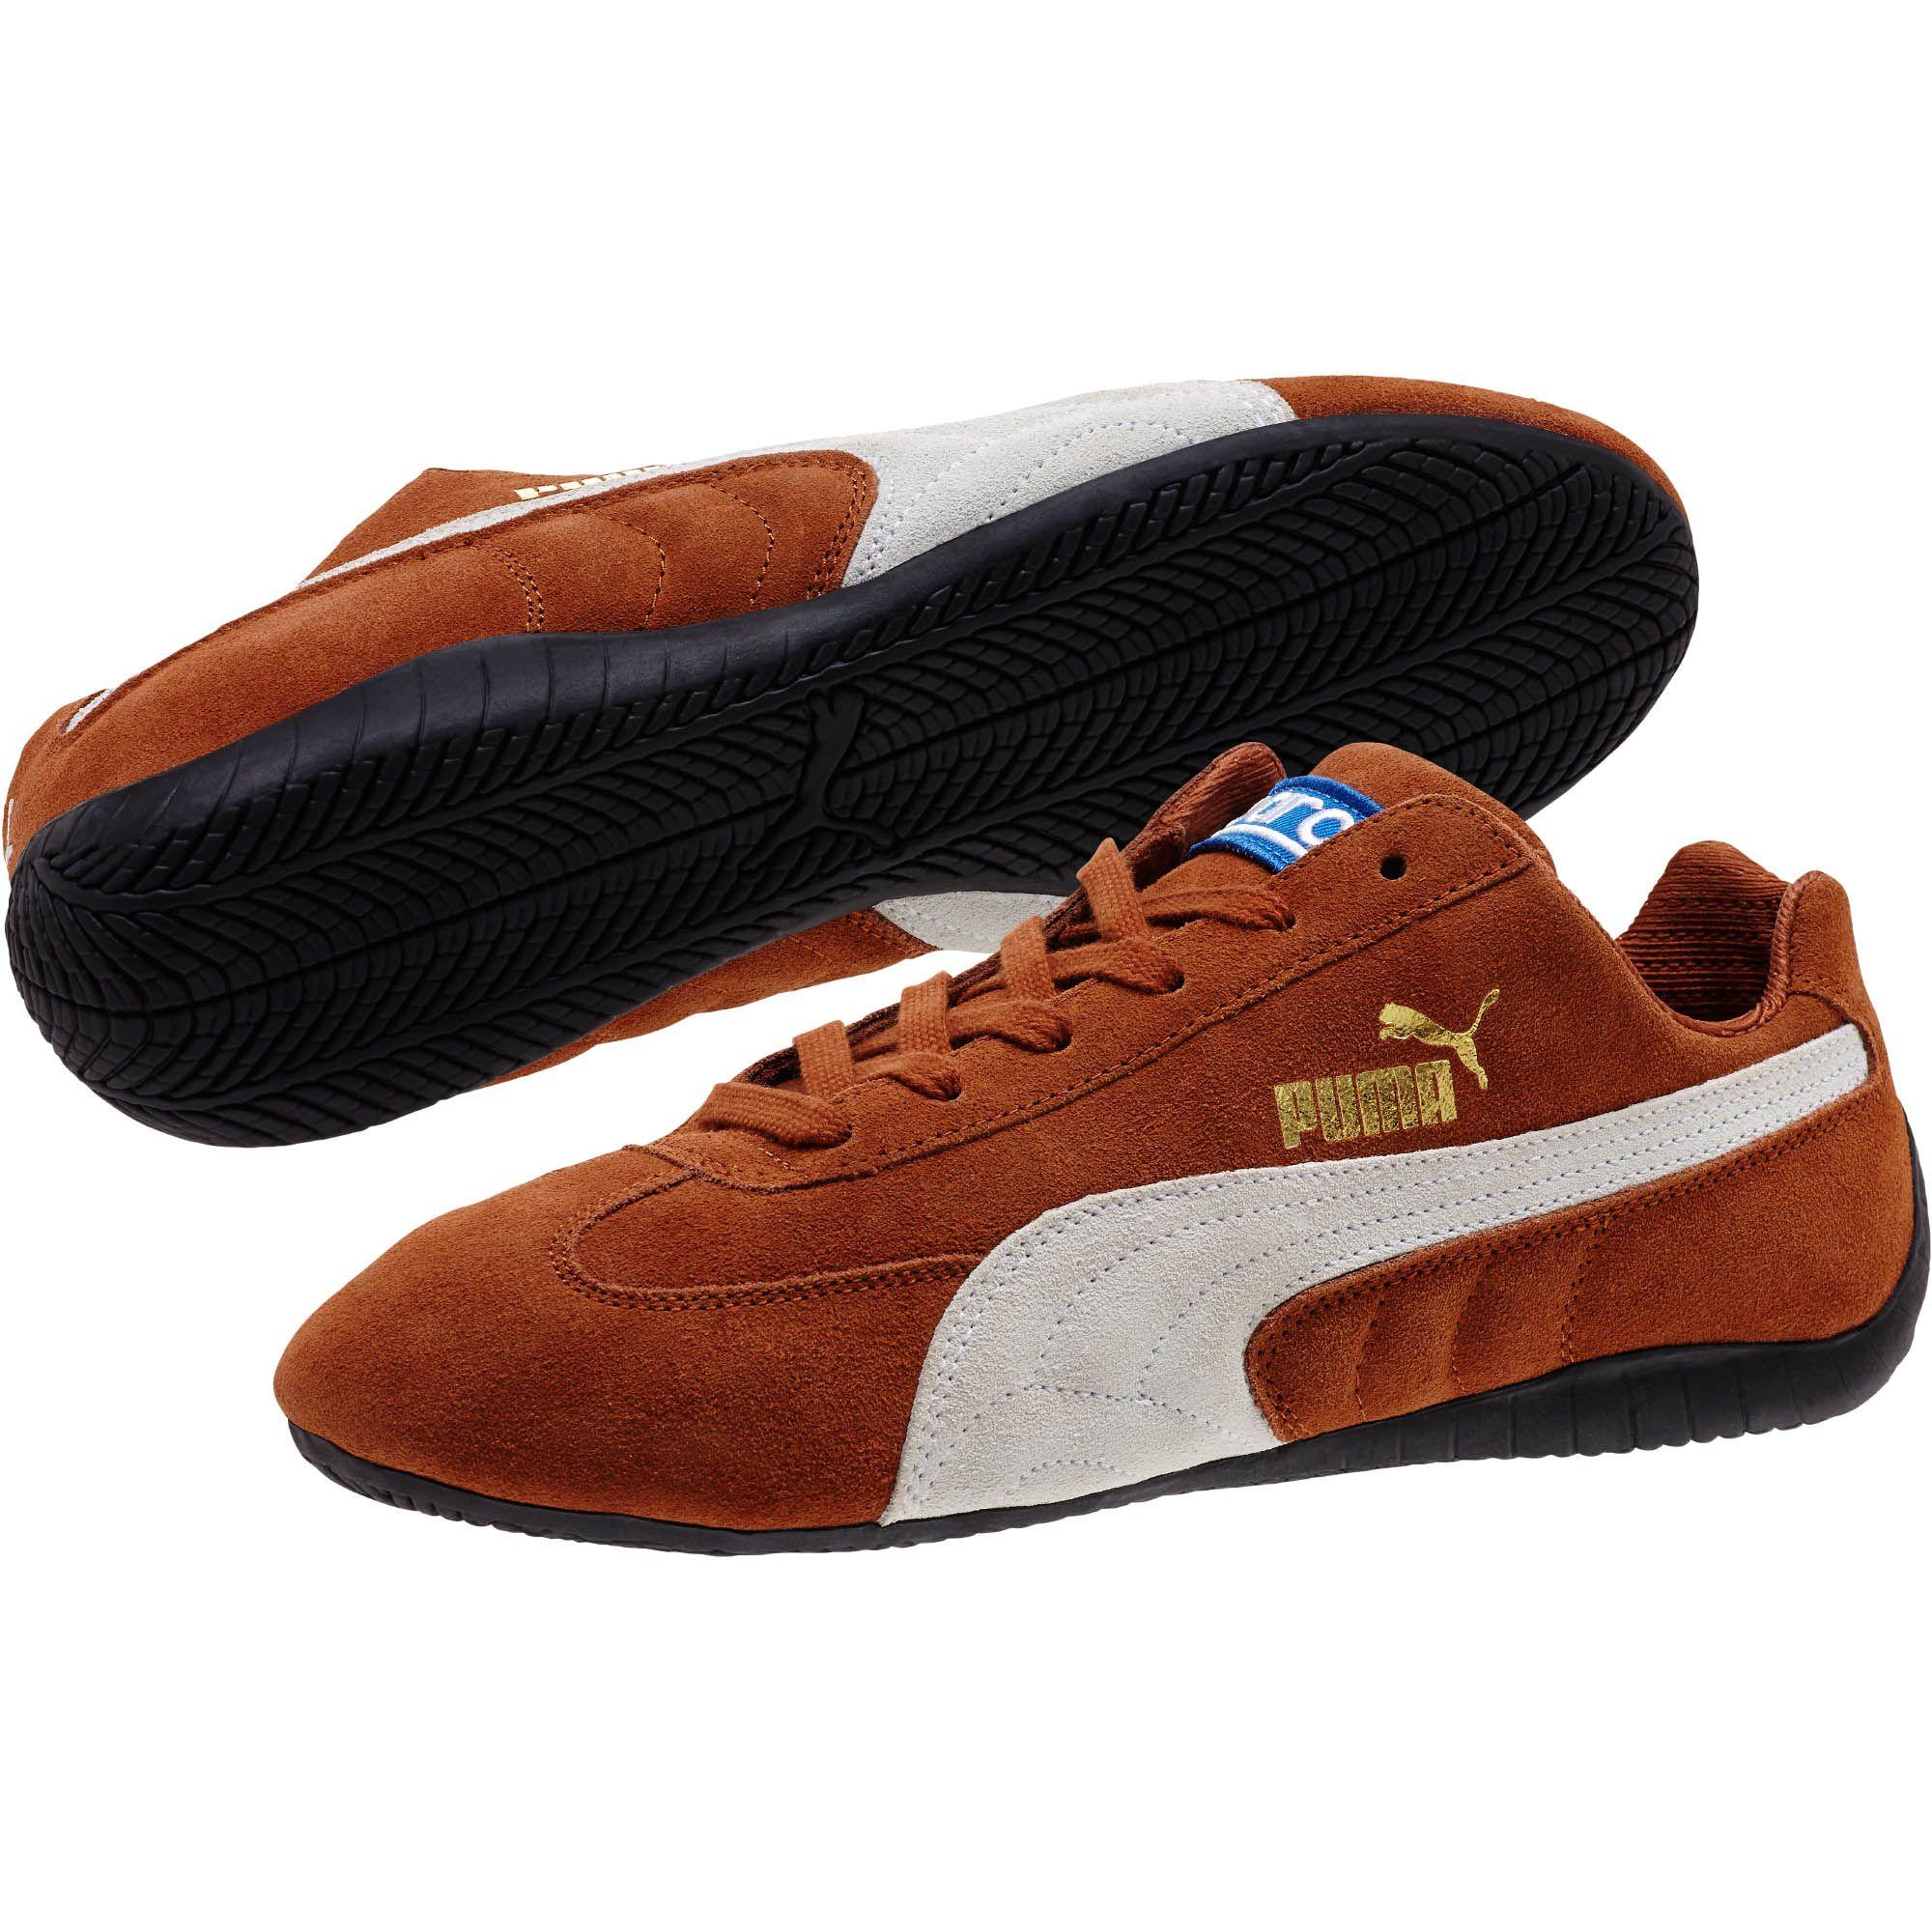 PUMA Suede Speed Cat Shoes in Brown for Men - Lyst